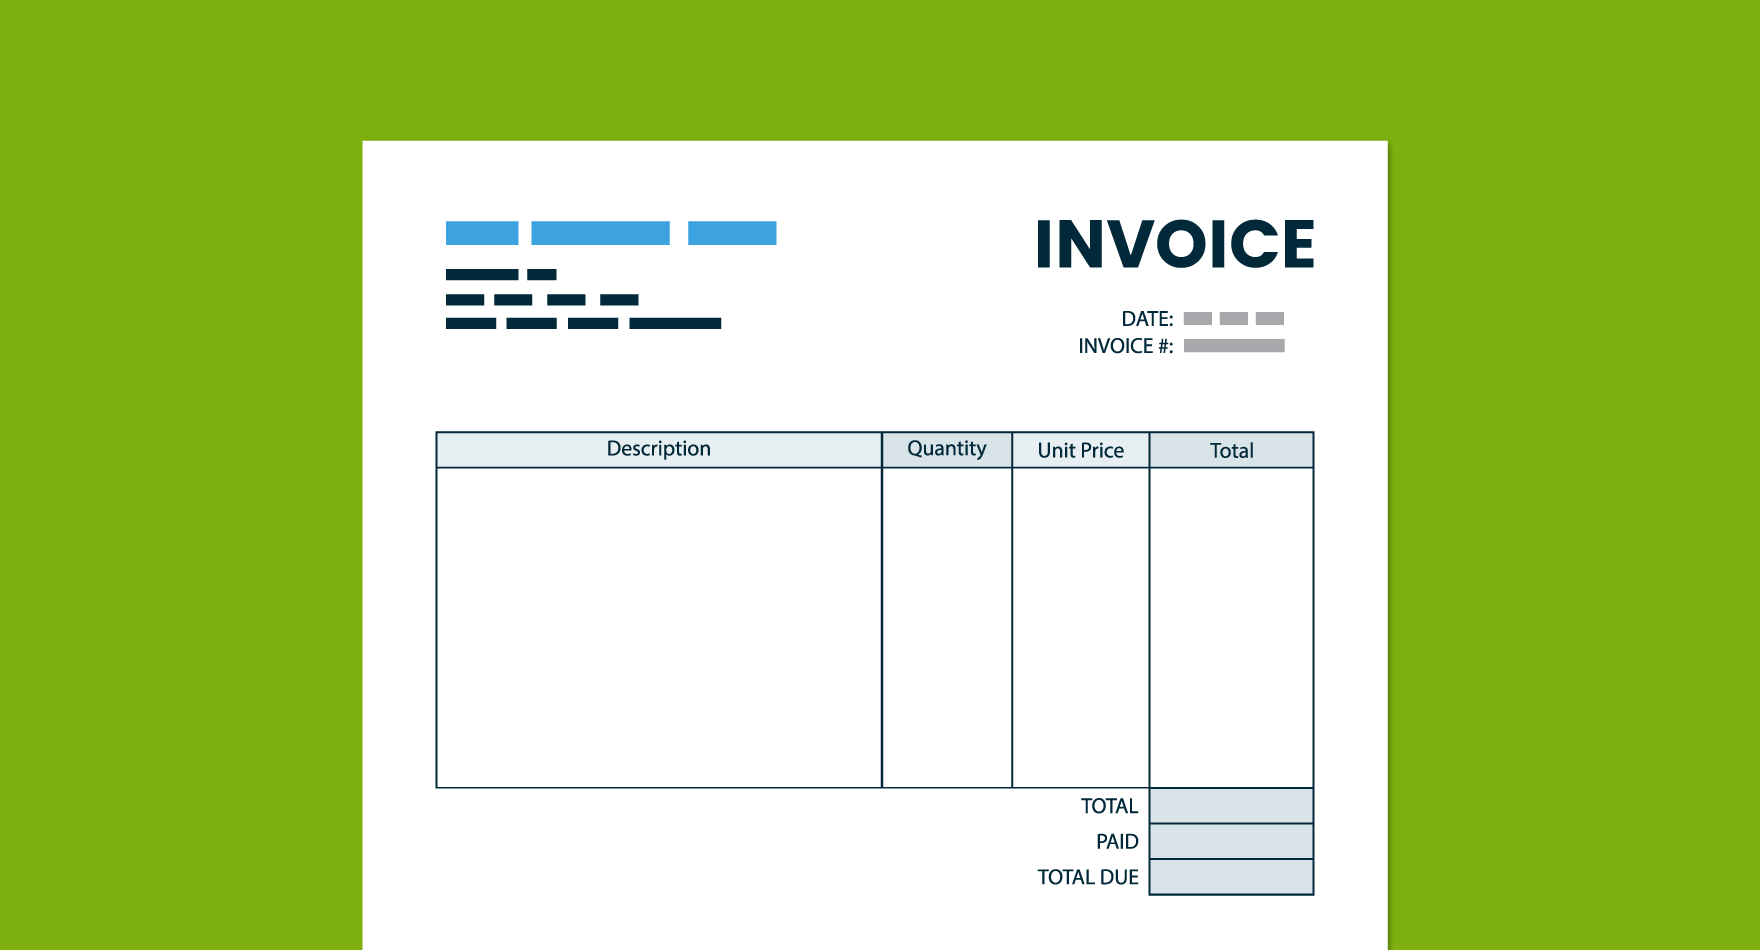 4 reasons to choose invoicing software